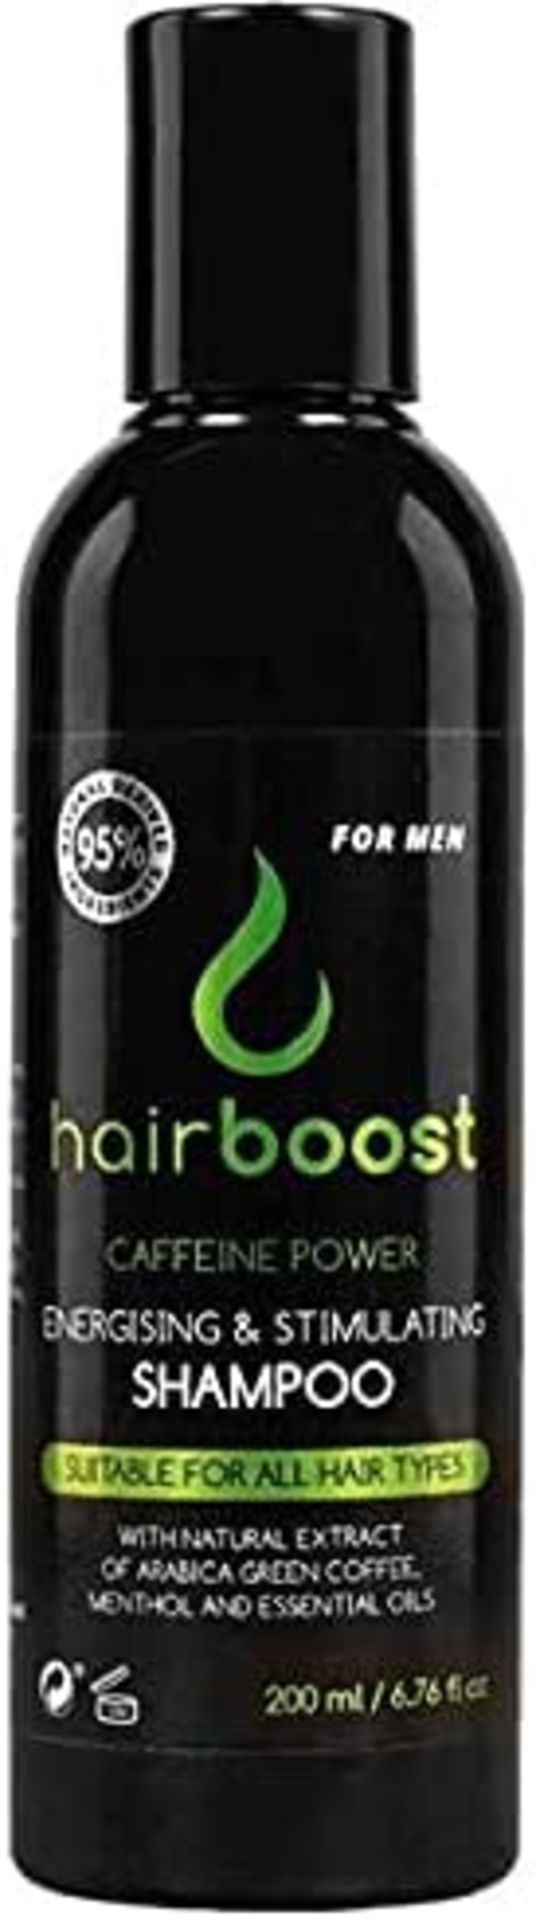 30 X BRAND NEW AIR BOOST ENERGISING AND STIMULATING SHAMPOO FOR MEN 200ML R10-3